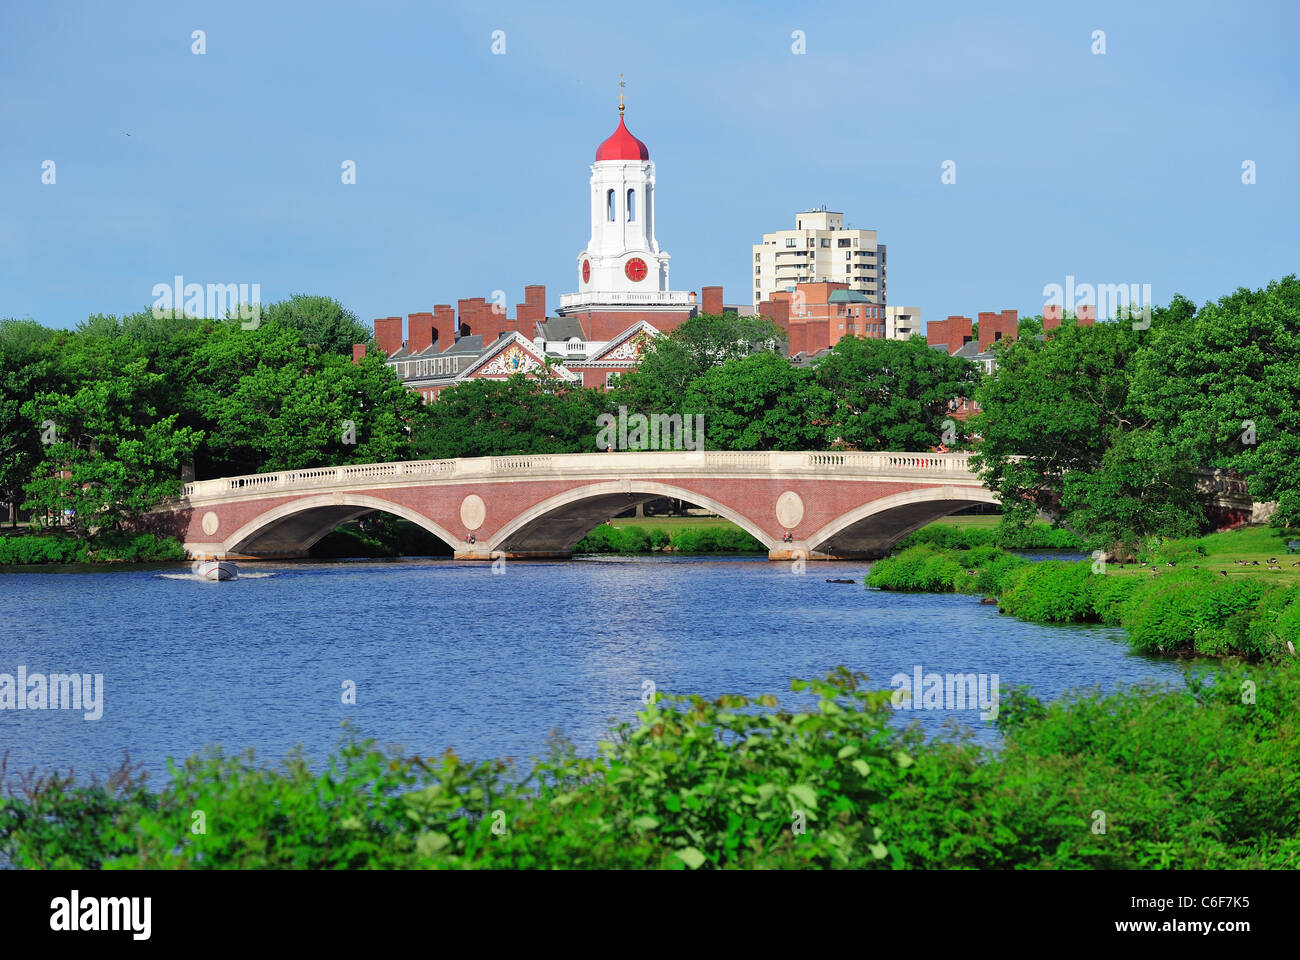 John W. Weeks Bridge and clock tower over Charles River in Harvard University campus in Boston with trees and blue sky. Stock Photo